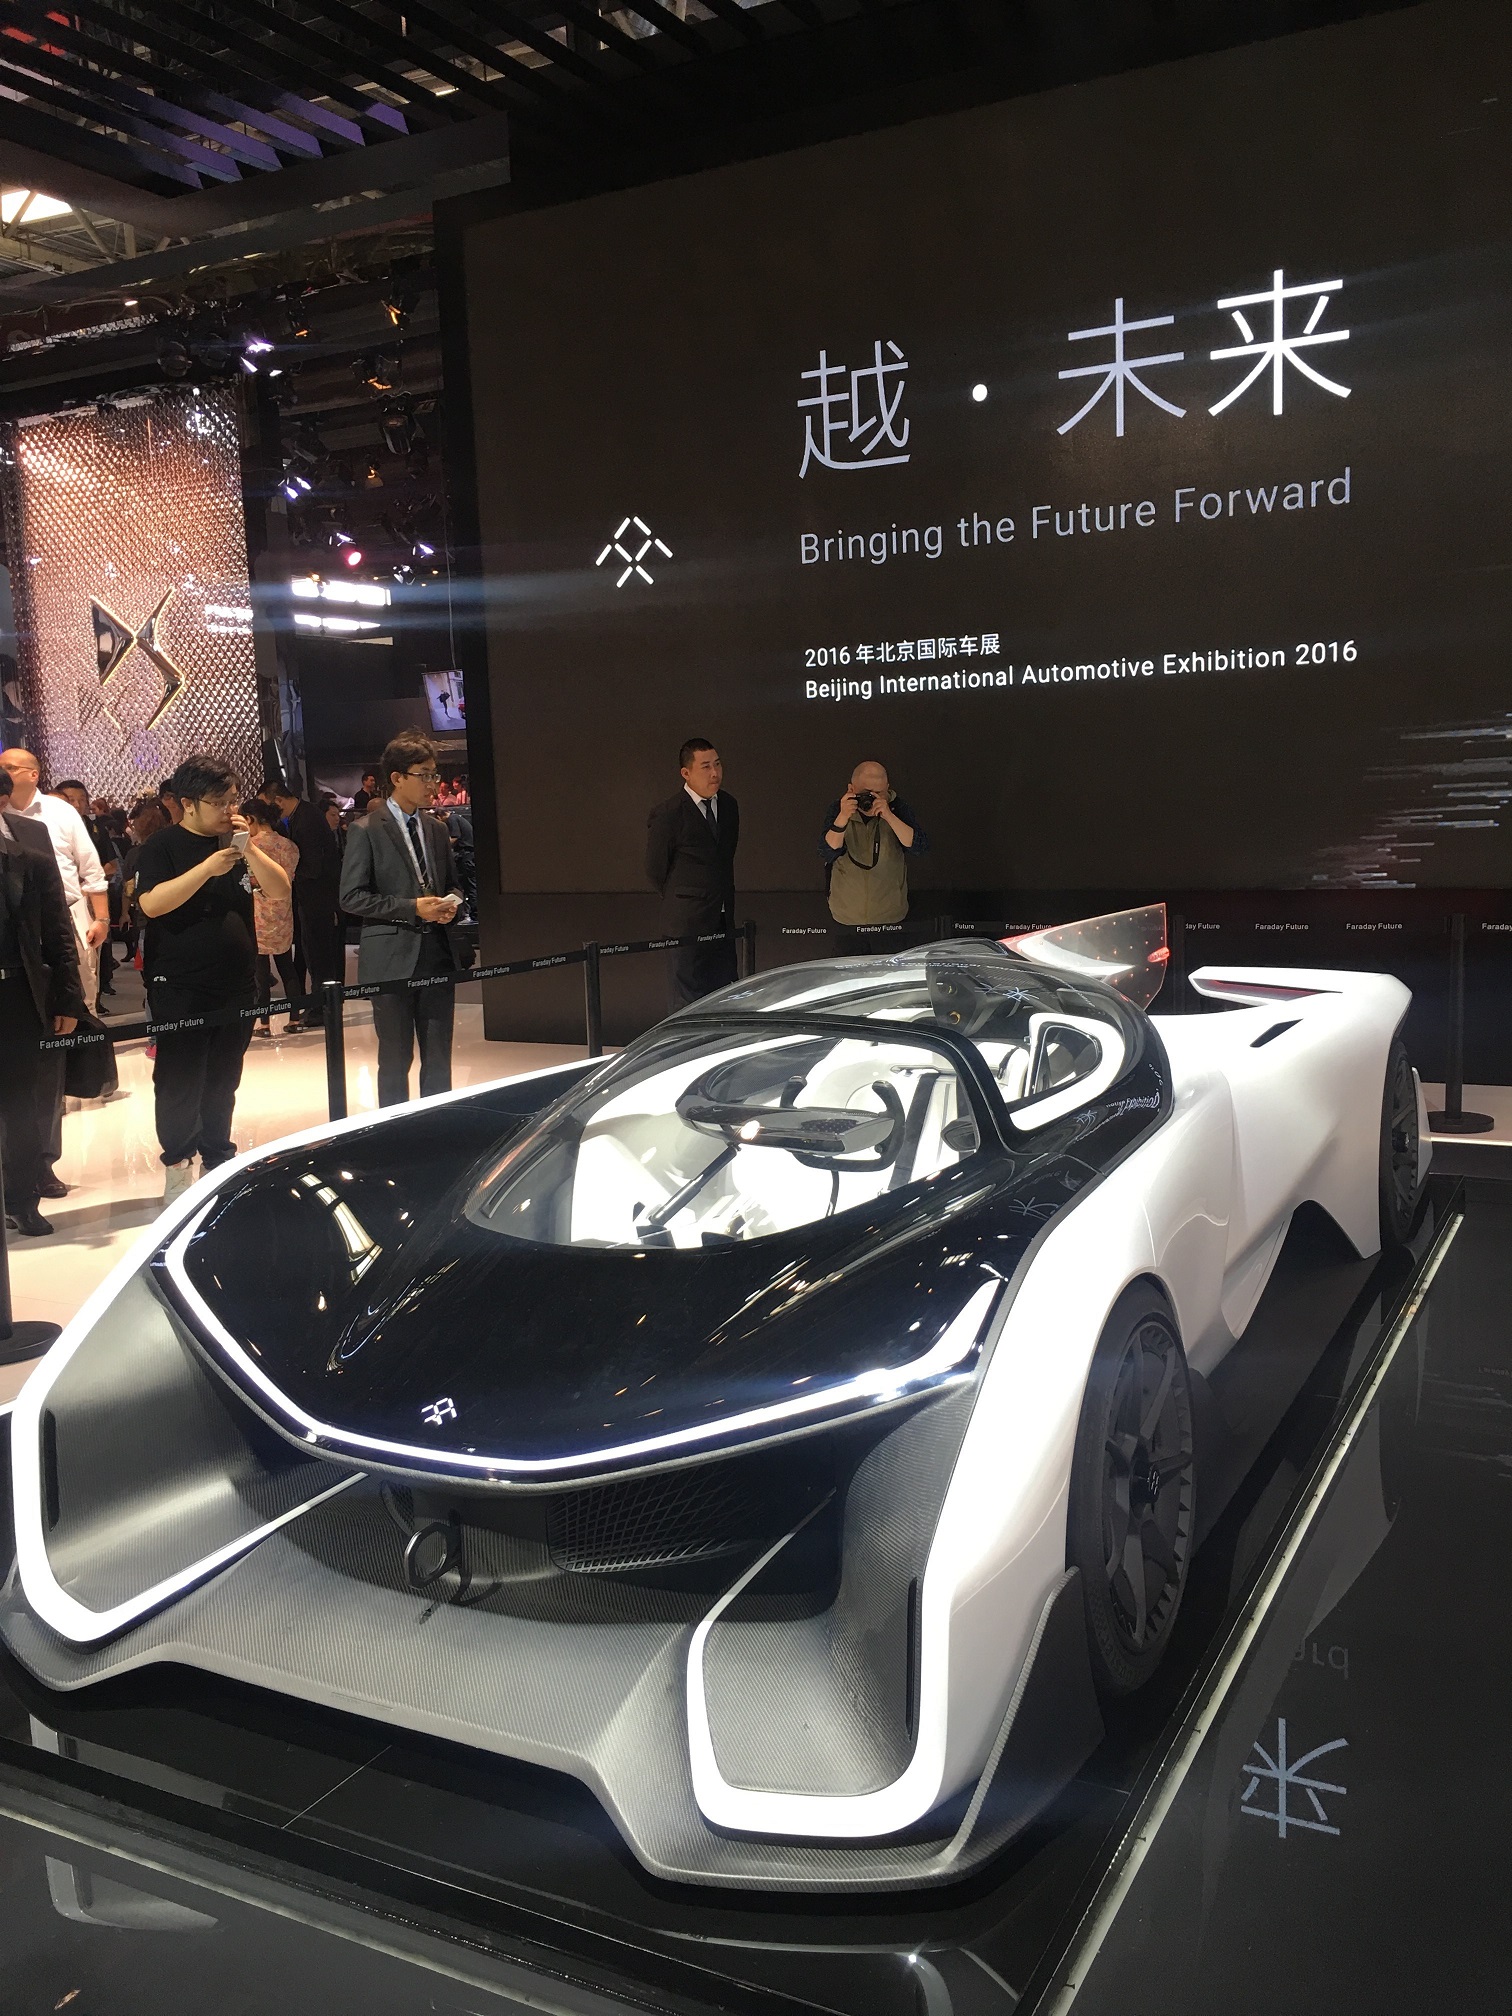 Faraday Future brought the FFZERO1 to Beijing, after first unveiling it in Las Vegas. Faraday Futures confirmed at the show that their first production model would be an SUV.